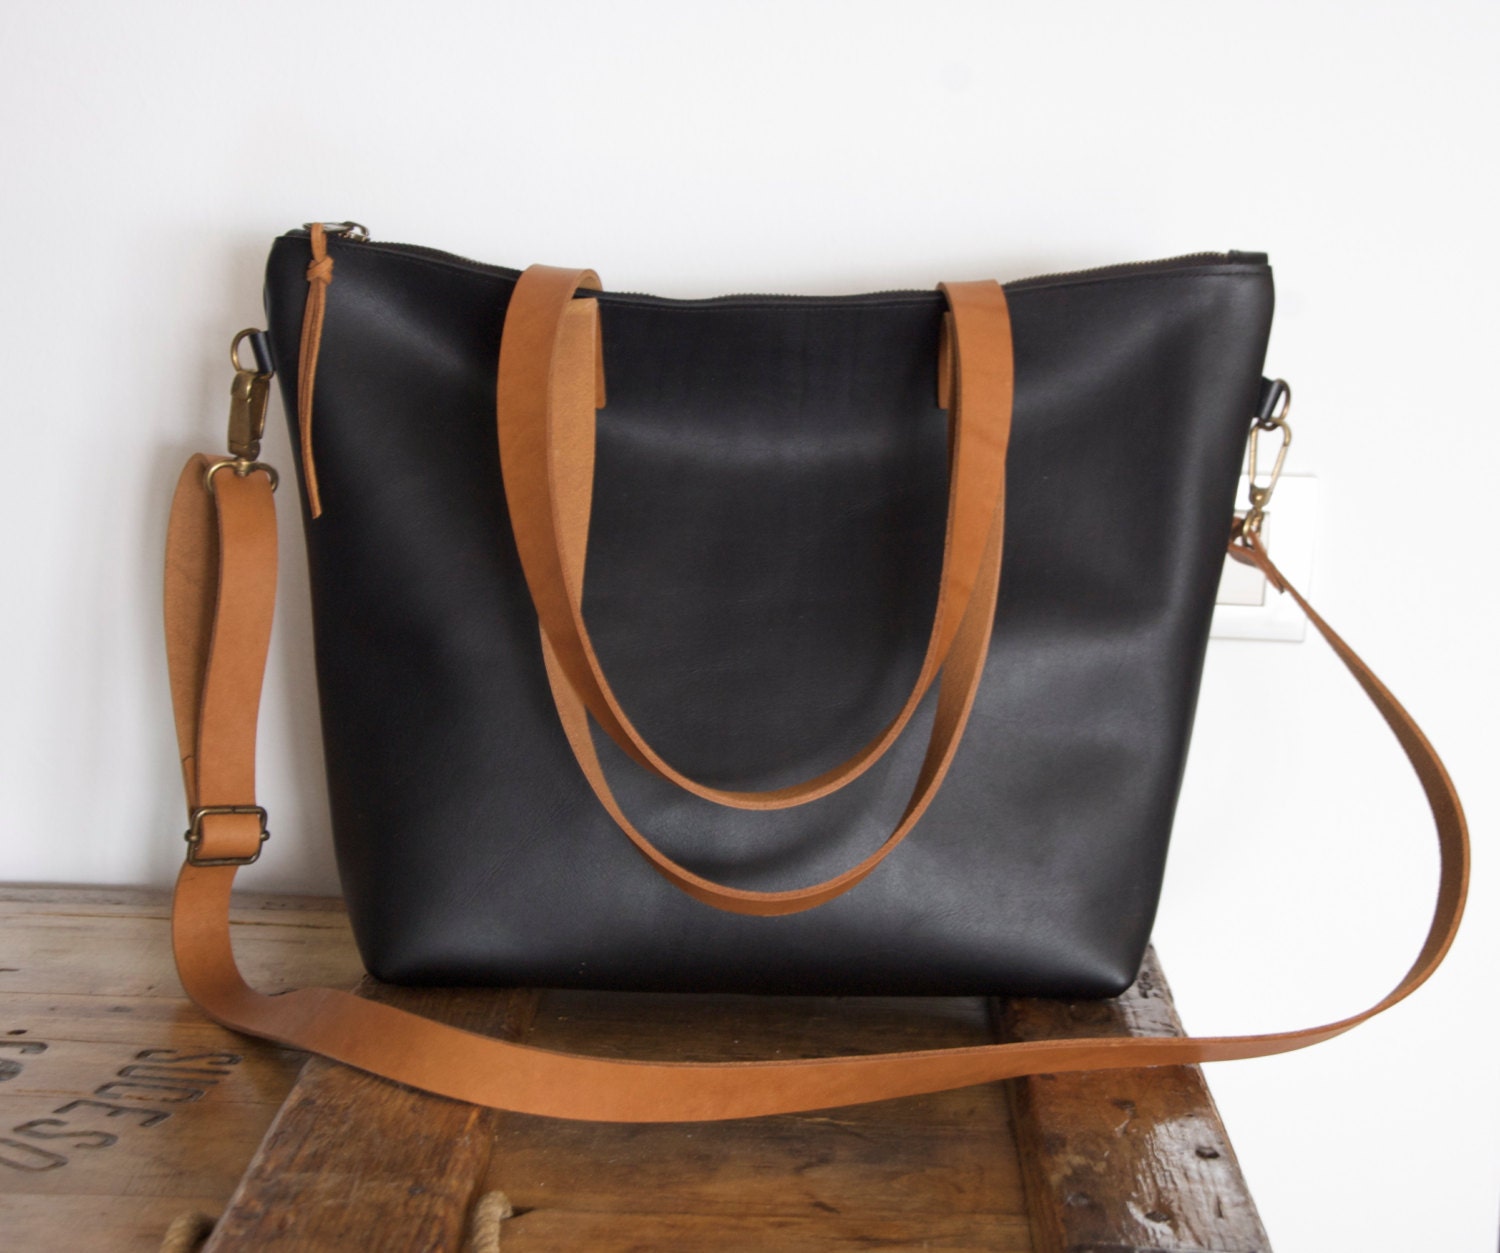 Medium Black Leather bag with zip and brown leather straps.